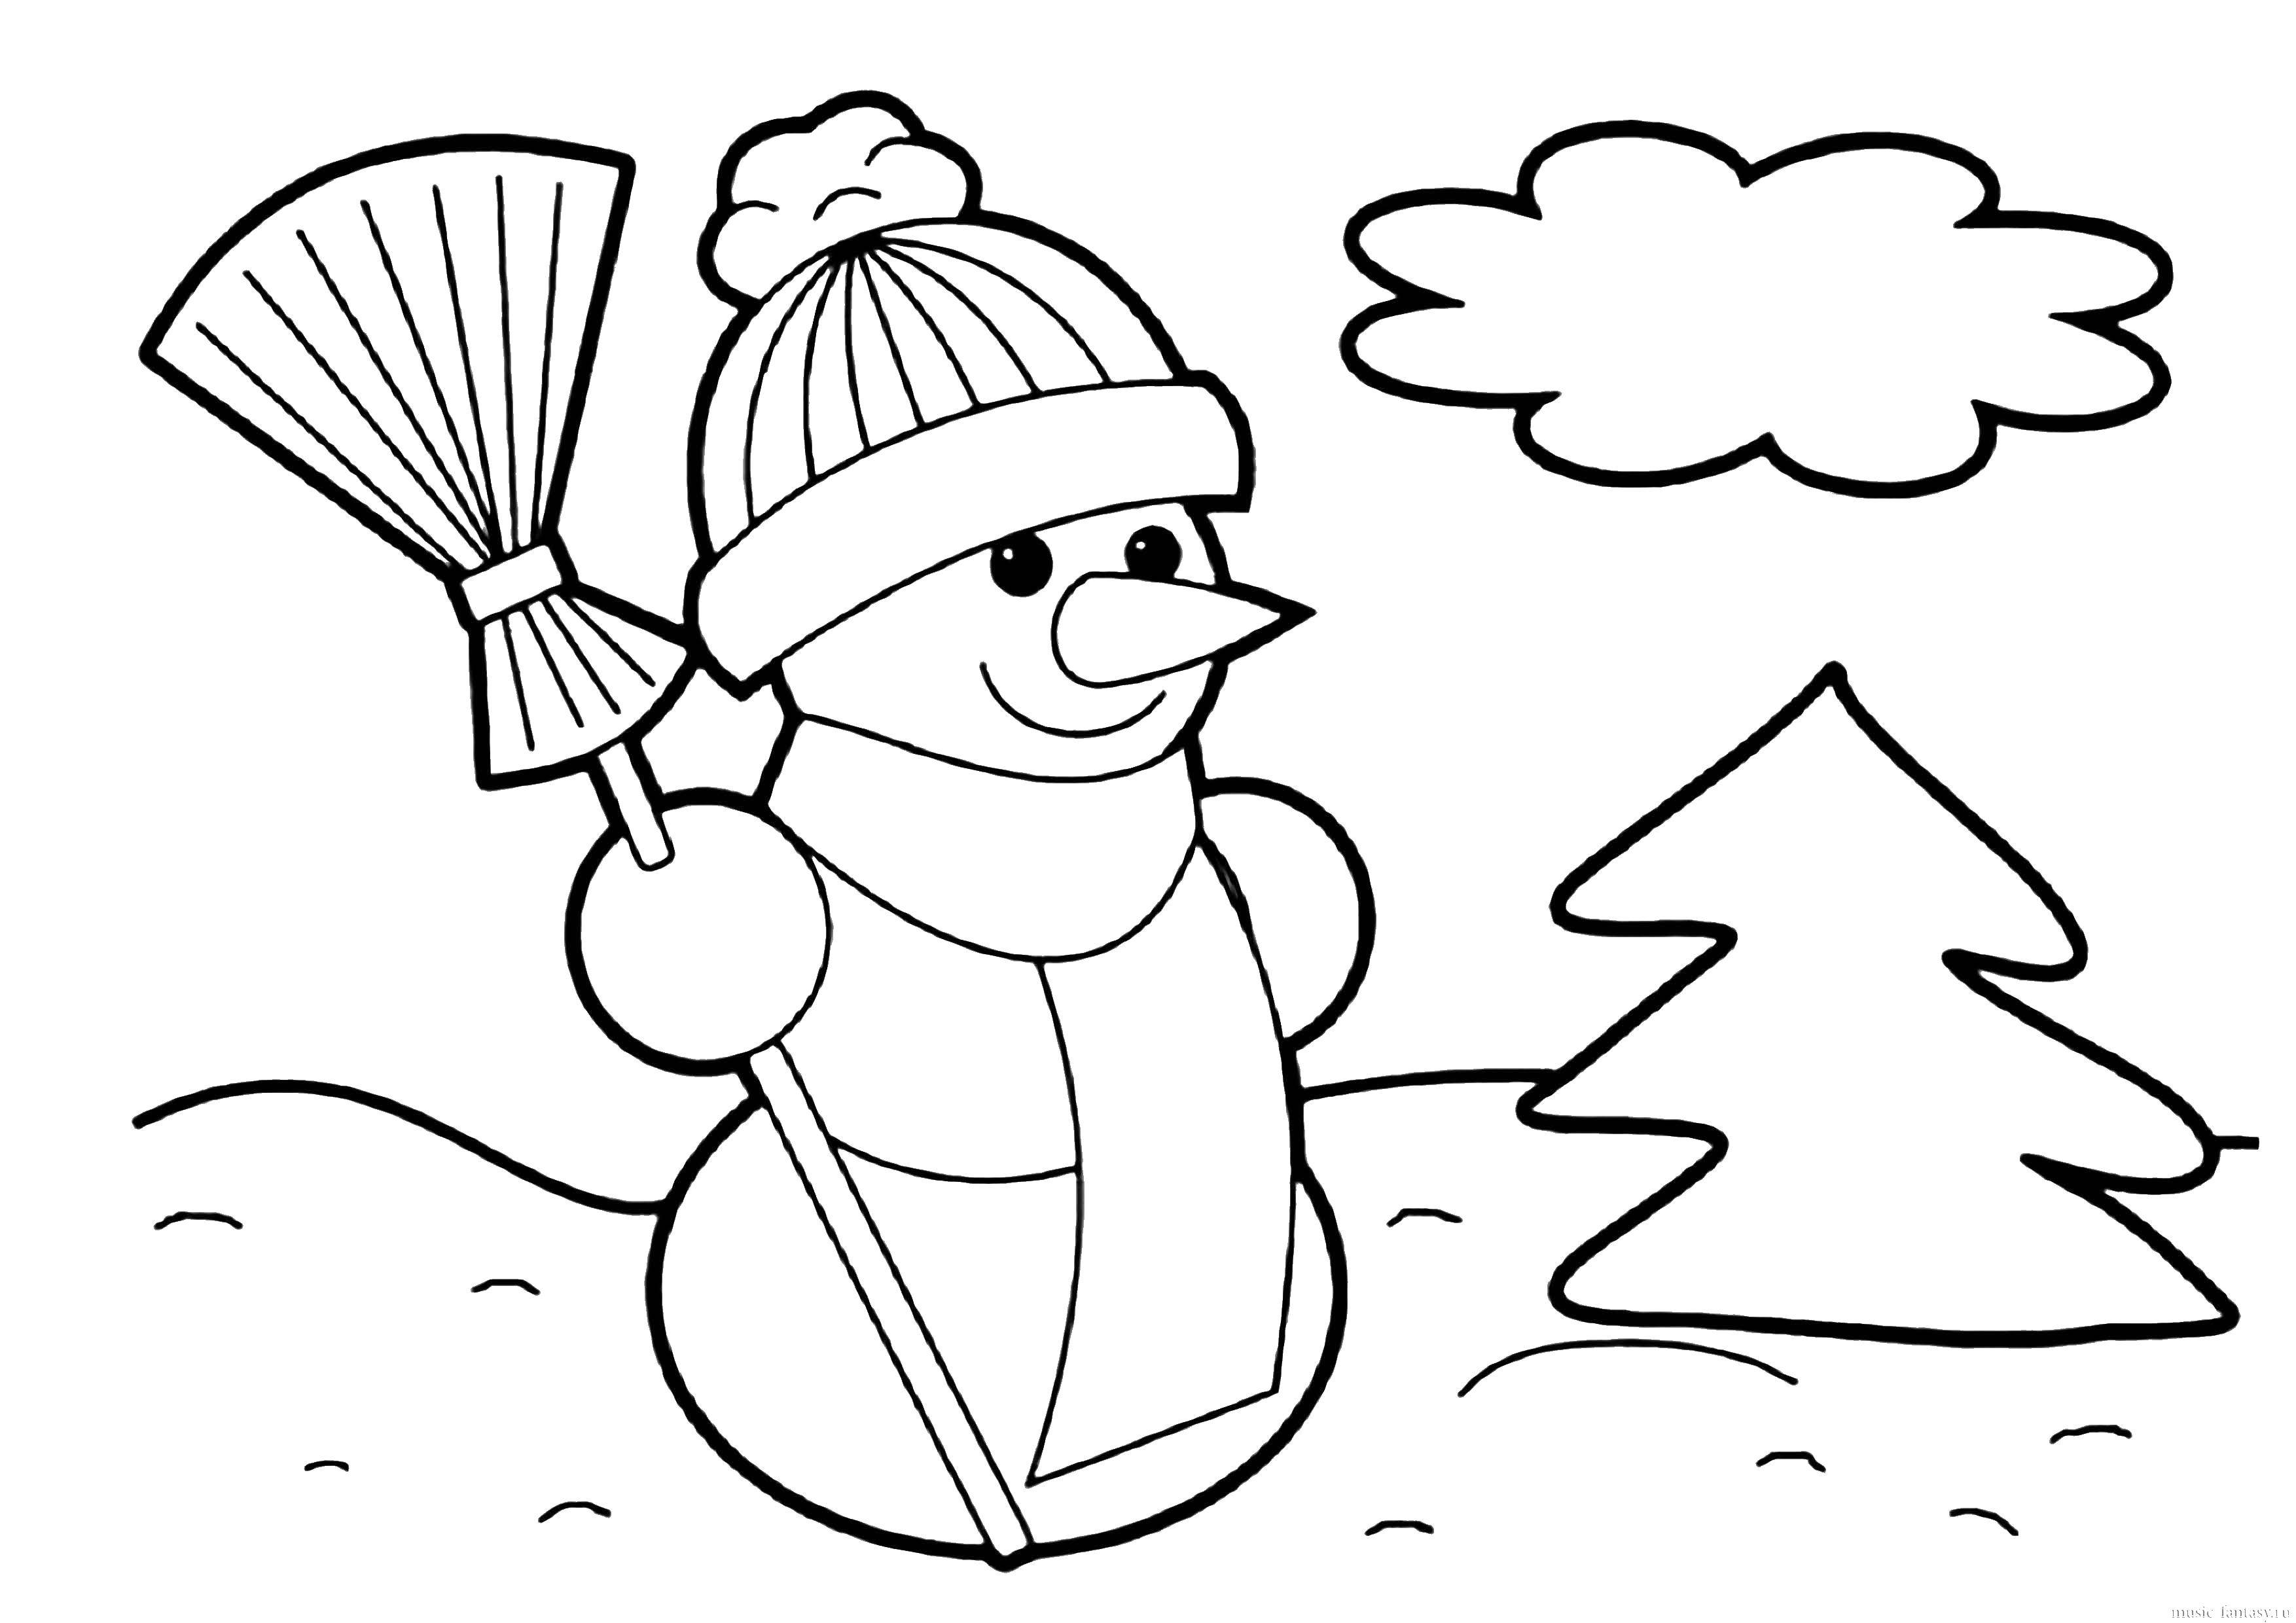 Coloring Snowman in the woods. Category snow. Tags:  snowman.